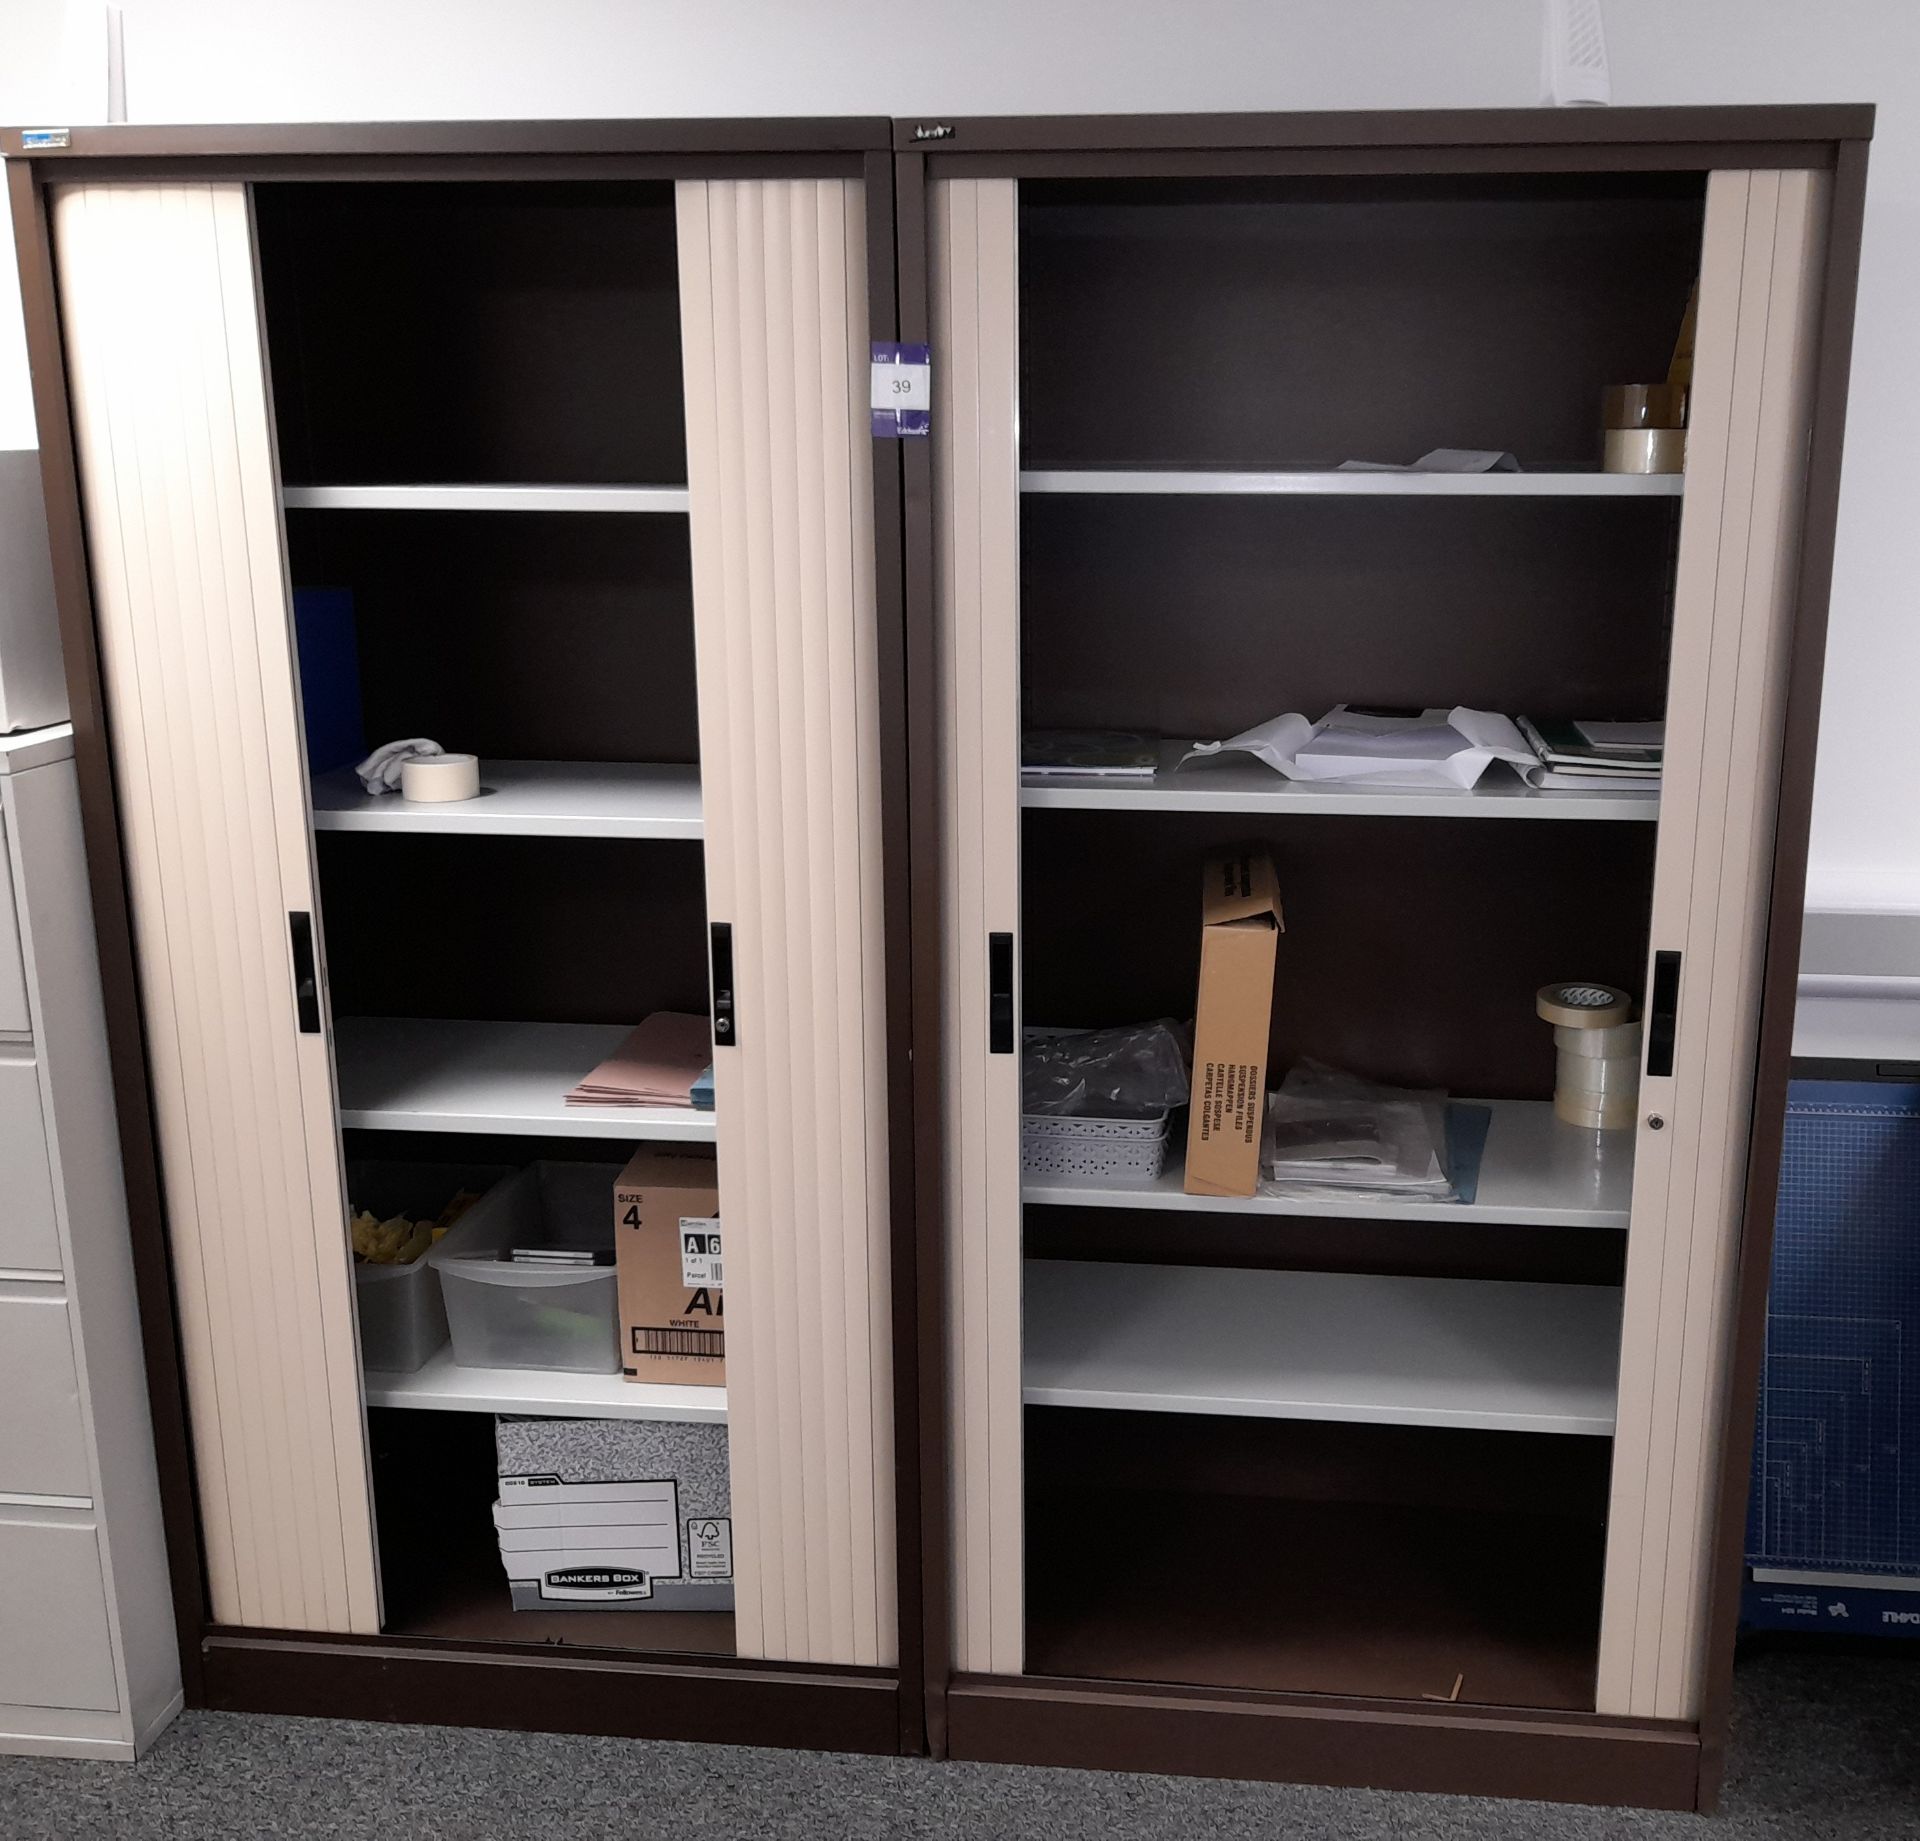 Pair of Silverline Tambour Fronted Cupboards